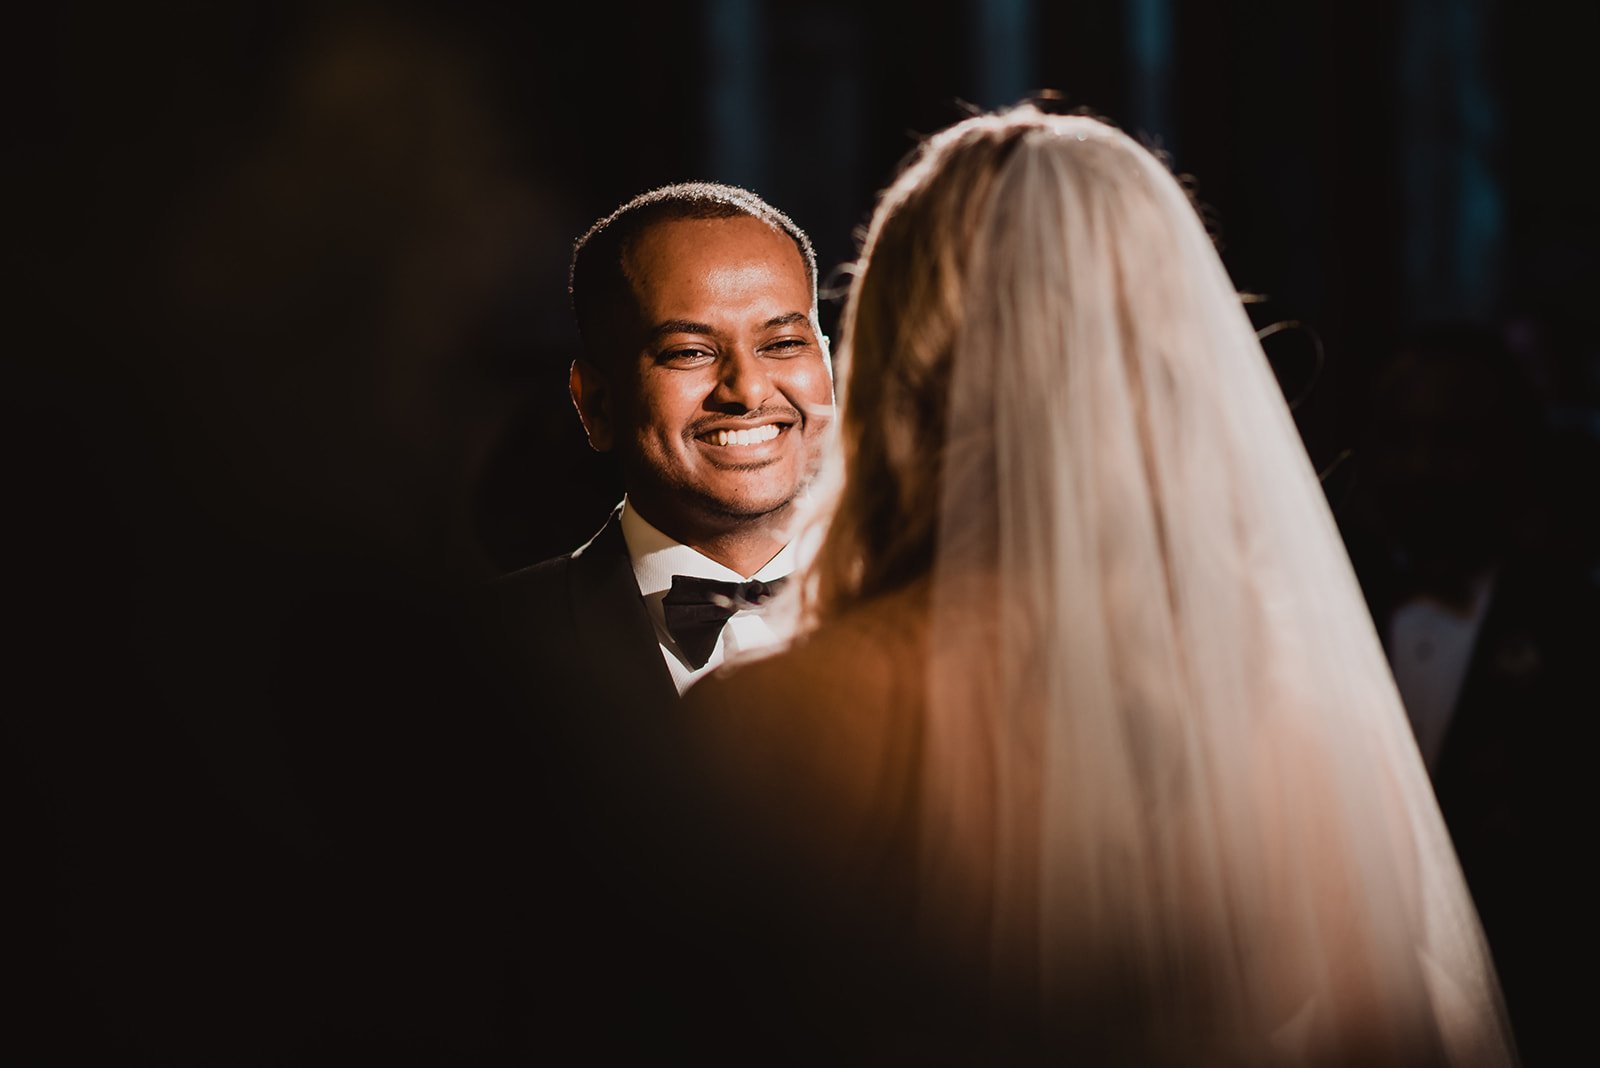 The groom laughing during the ceremony